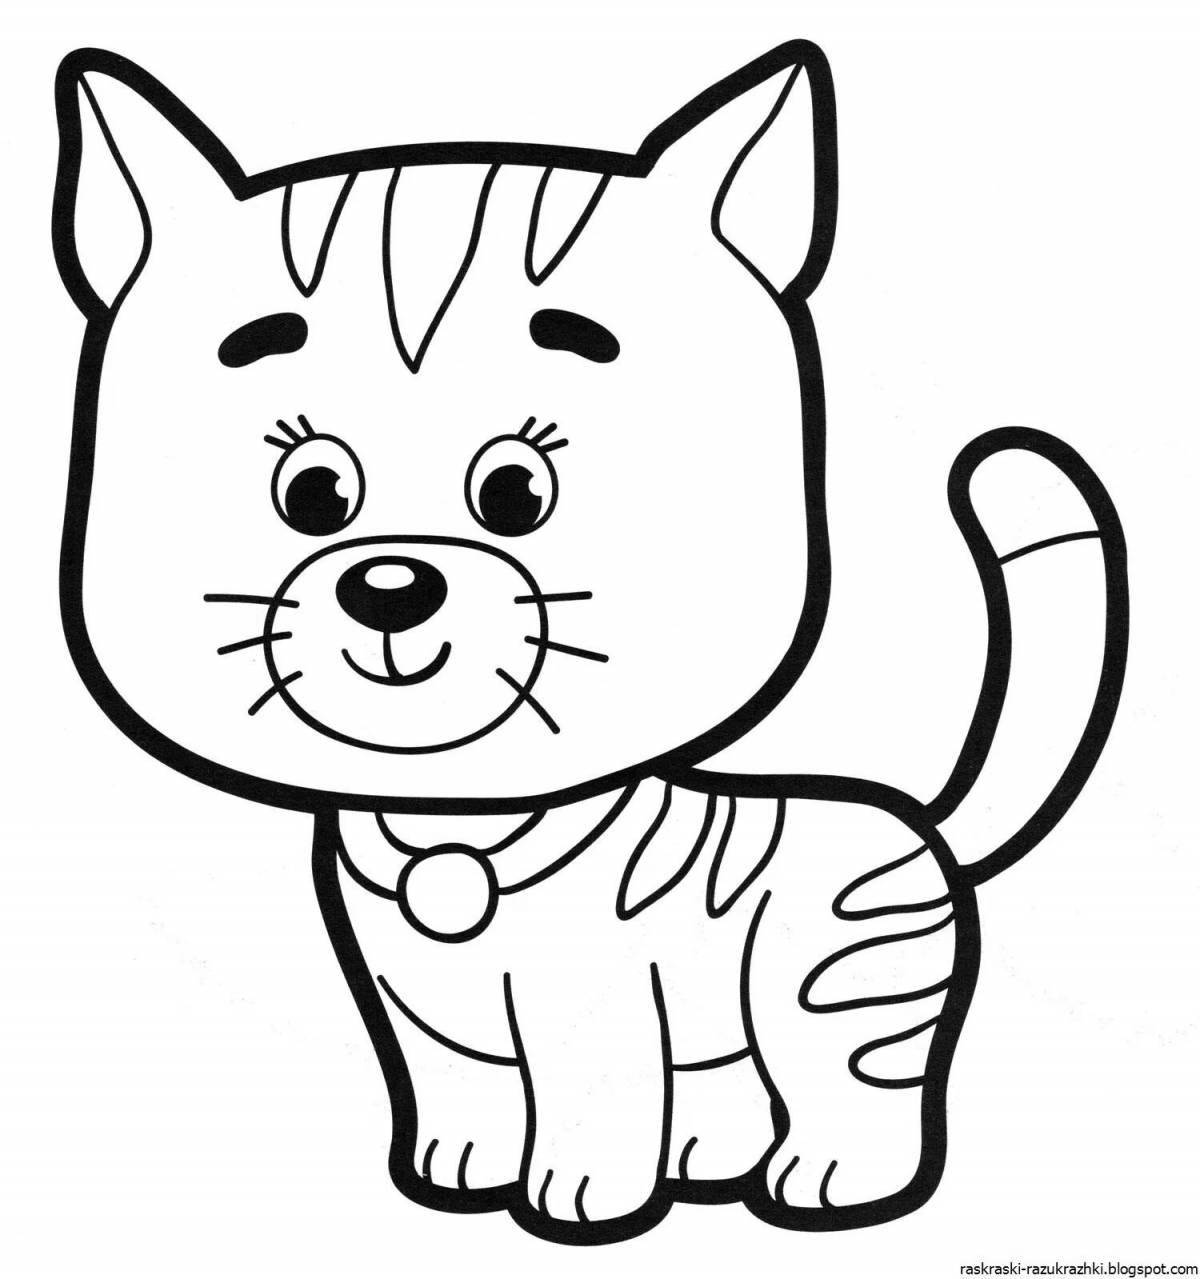 Adorable cat coloring book for kids 4-5 years old